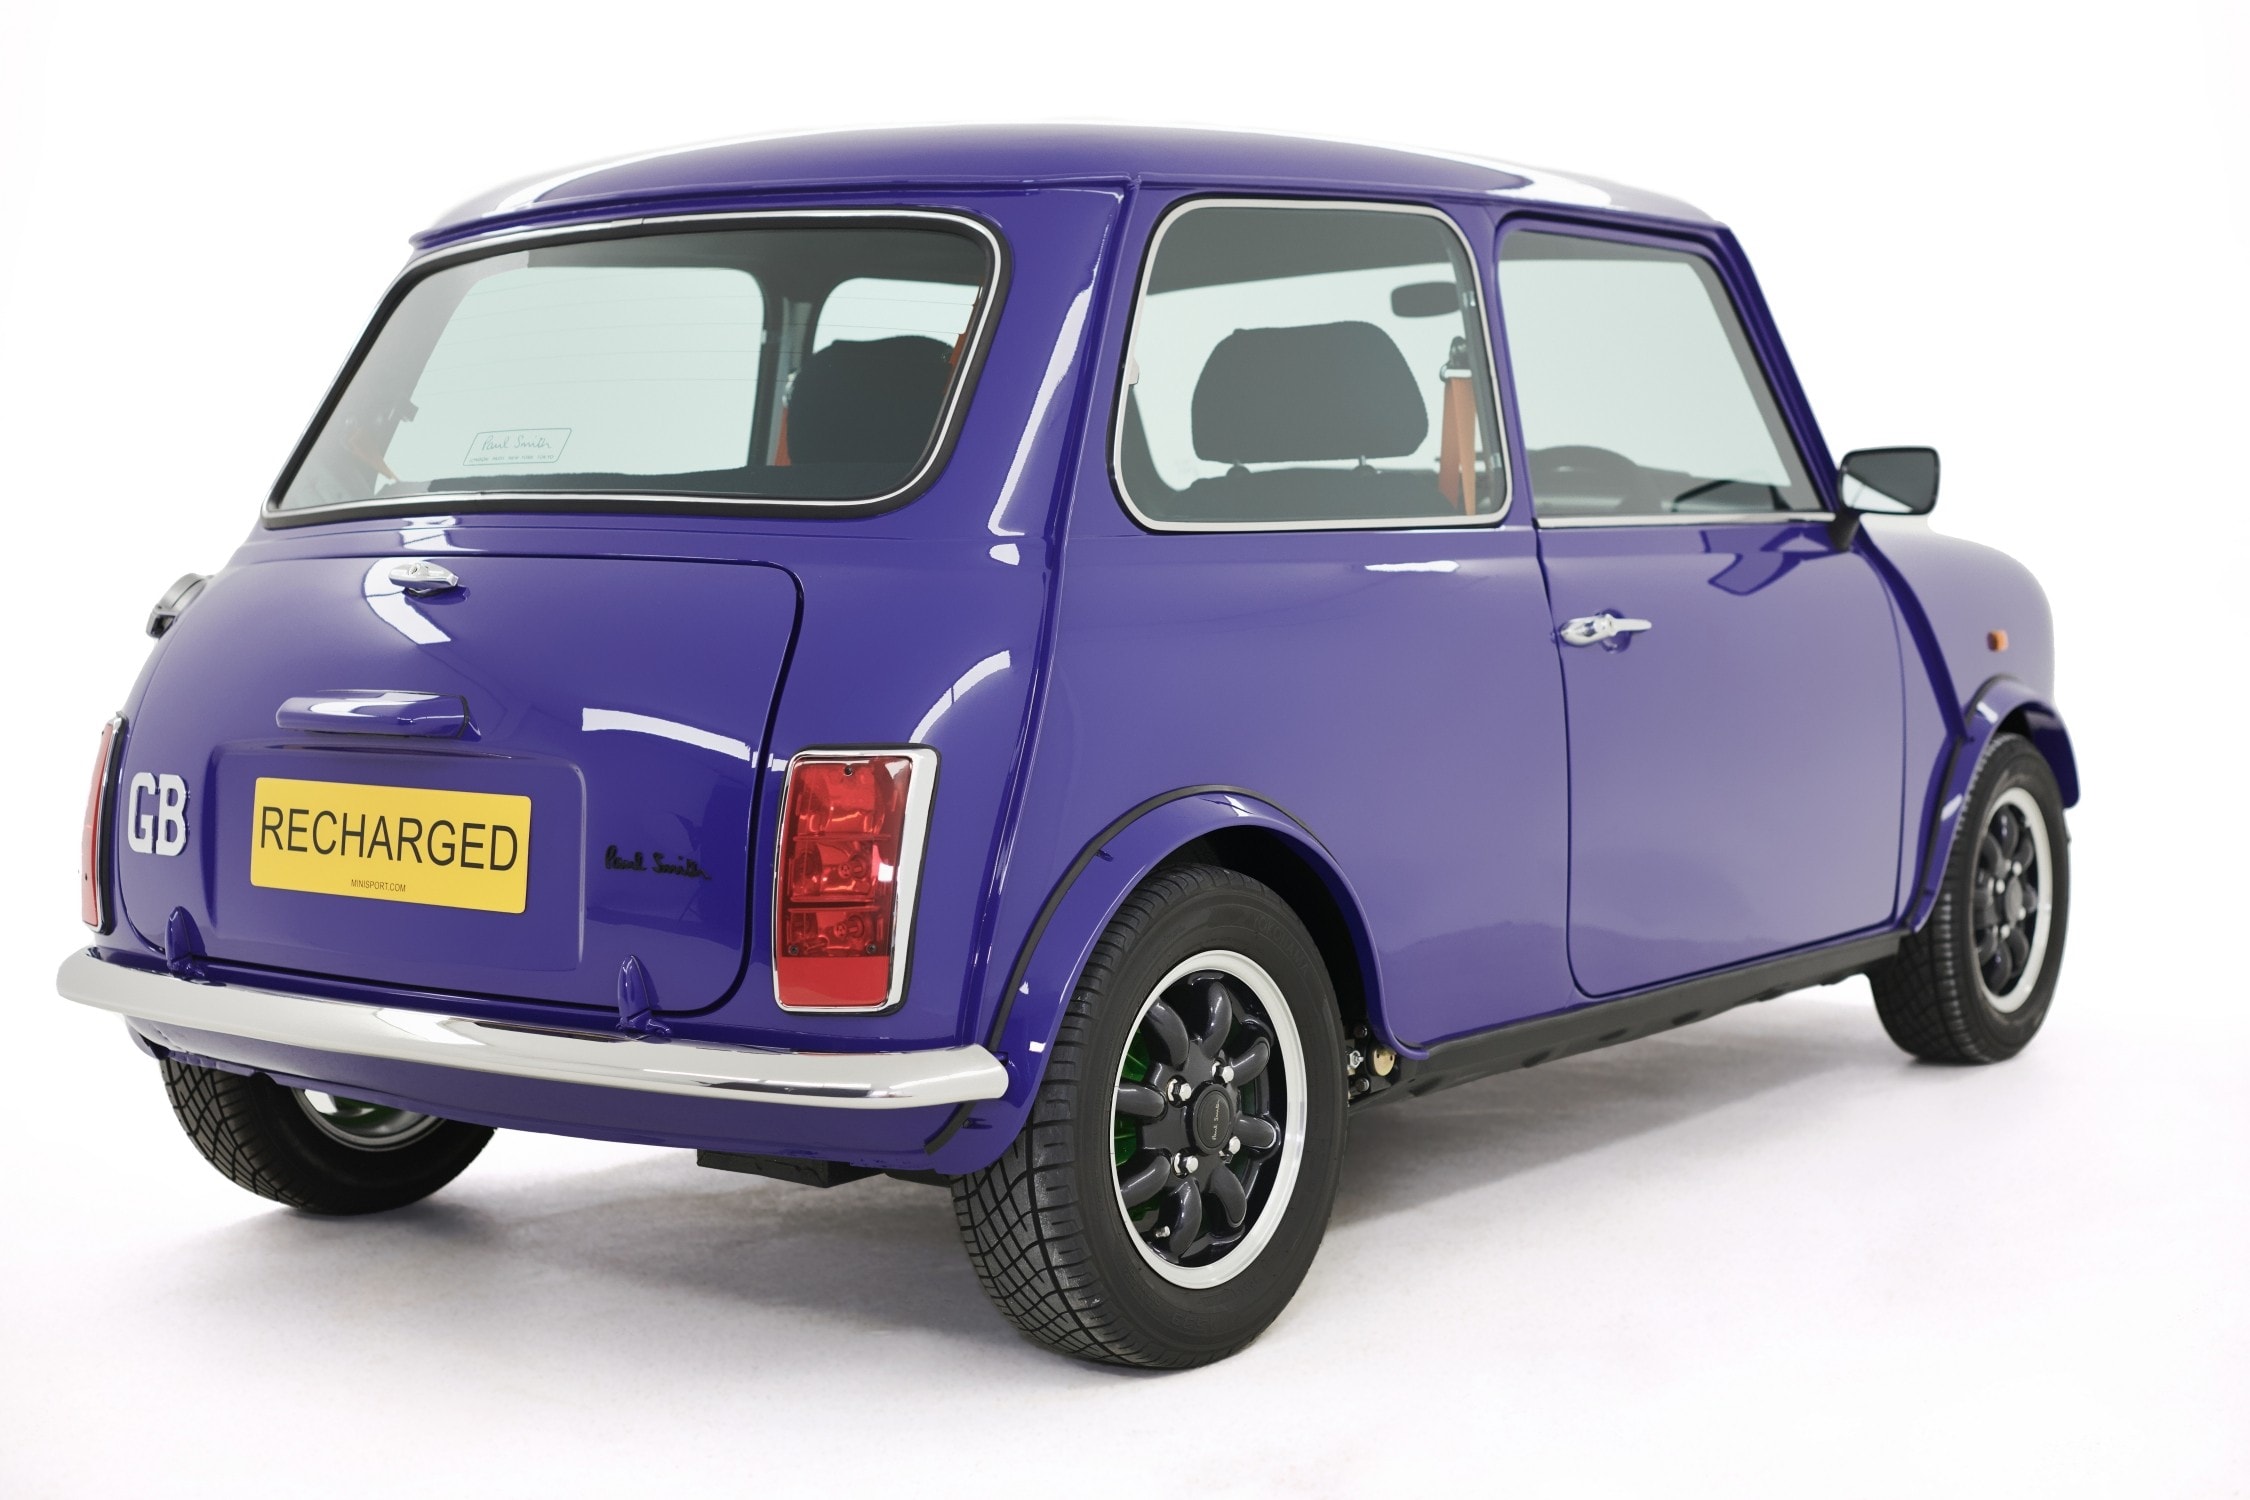 Paul Smith describes the MINI Reloaded model in three words: quality, durability and functionality.